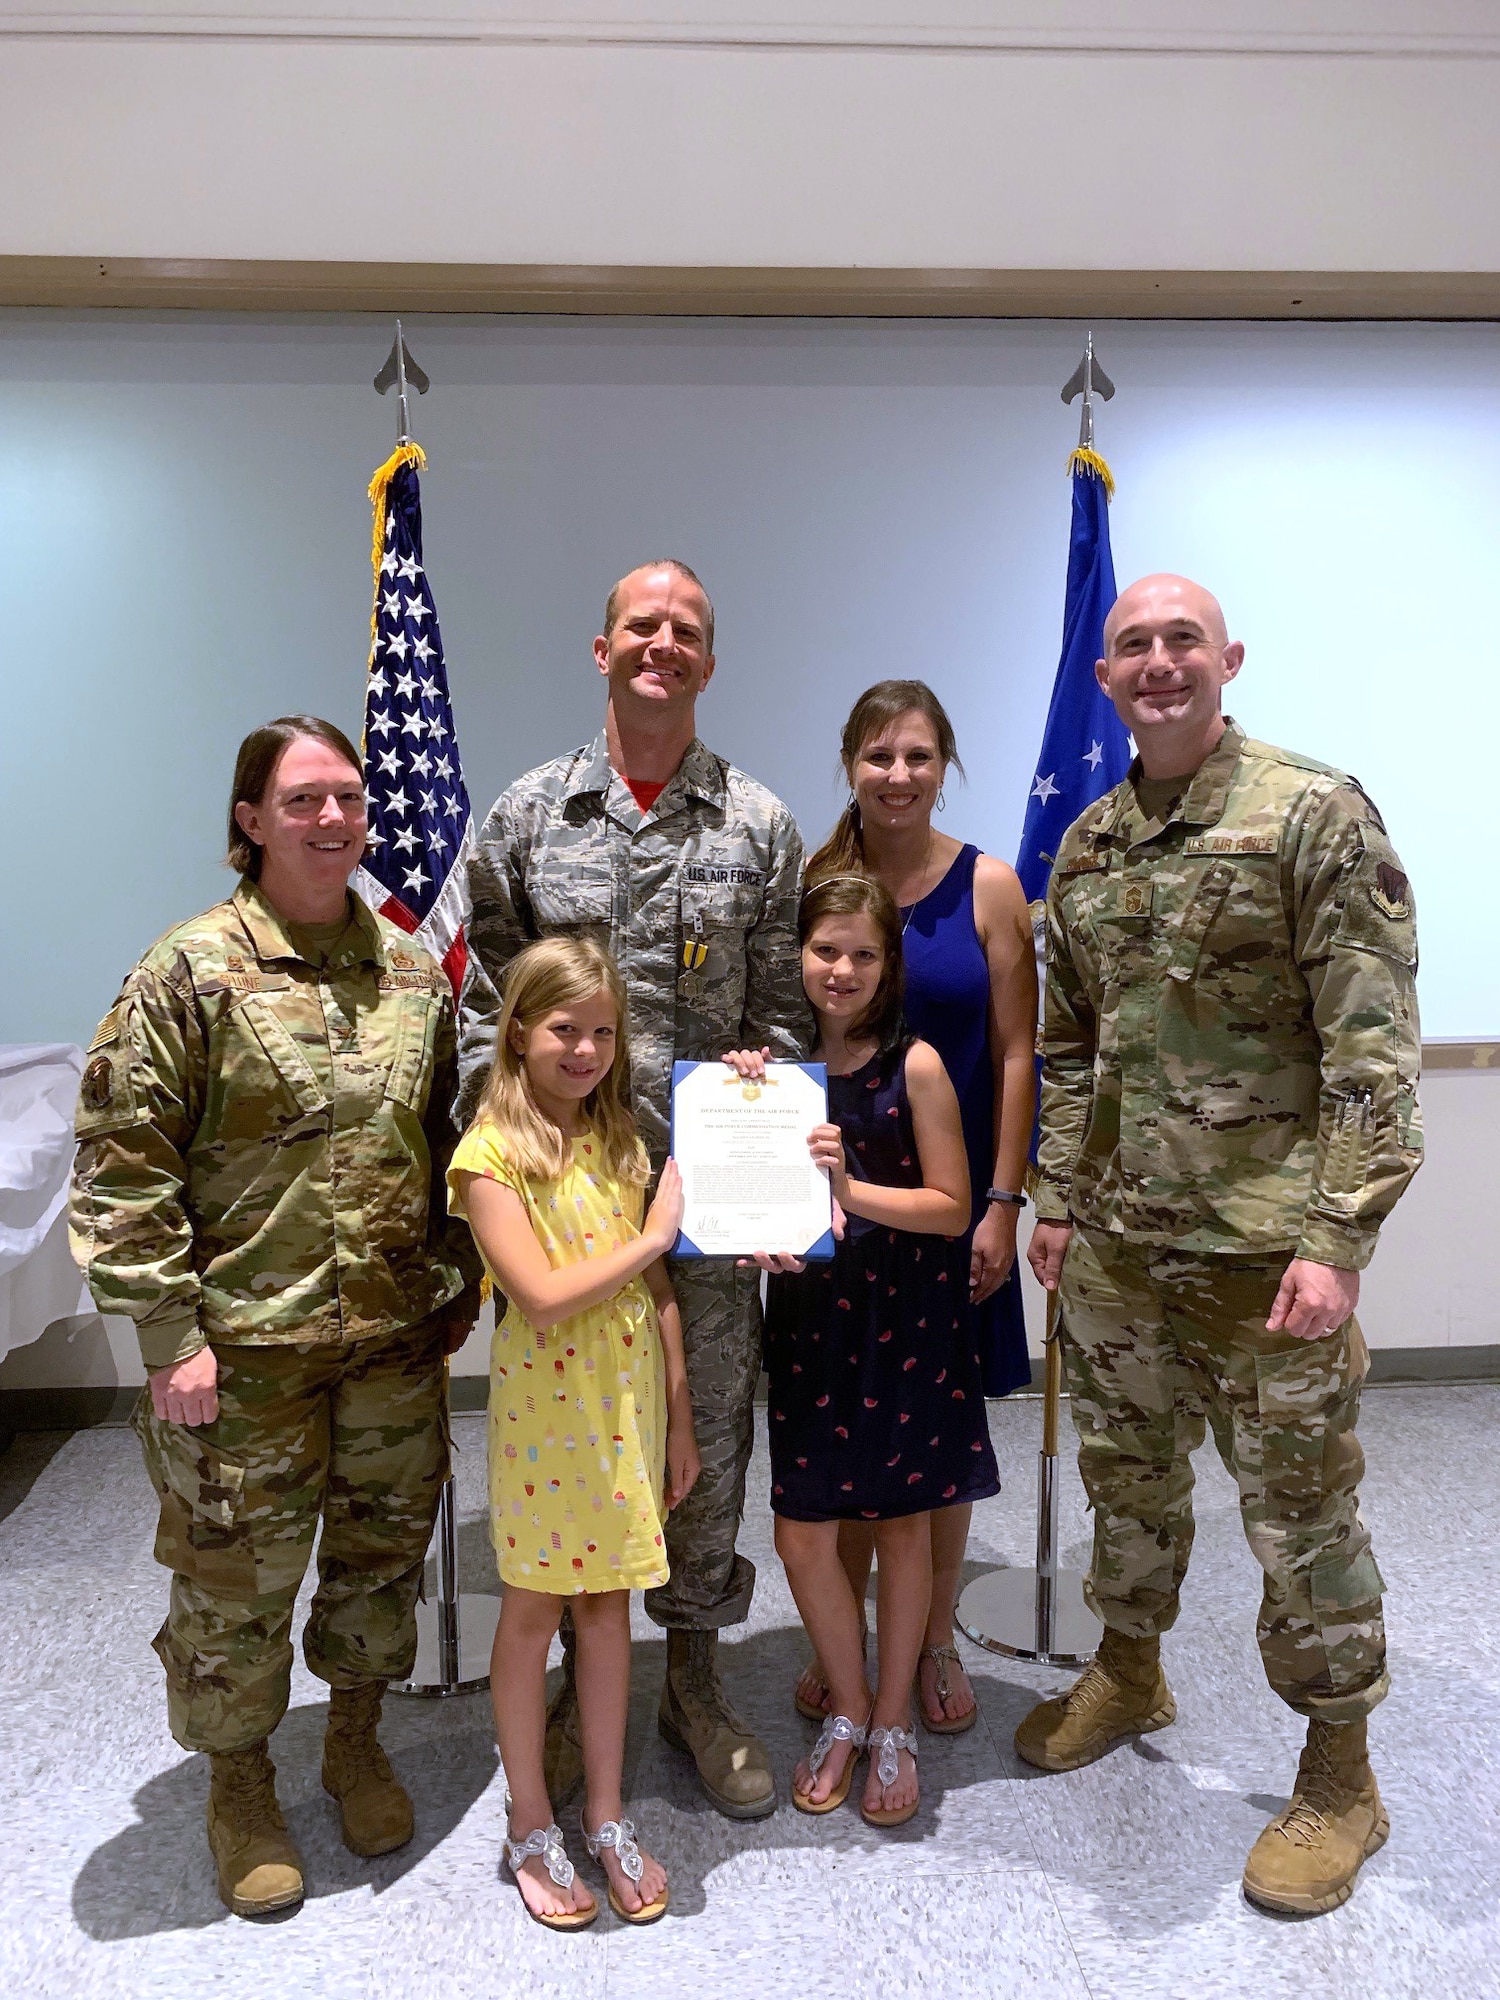 U.S. Air Force Col. Melissa Stone (far left), 363d ISR Wing commander, and Chief Master Sgt. Stefan Blazier (far right), 363d ISRW command chief, present Master Sgt. Zachary H. (center), 547th IS operations superintendent, with the Air Force Commendation Medal at Nellis Air Force Base, Nevada, June 14, 2019. Zachary led the renovation and modernization efforts to bring the U.S. Air Force’s only threat training facility to meet the needs of today’s warfighters from Nov. 1, 2018 to March 1, 2019.